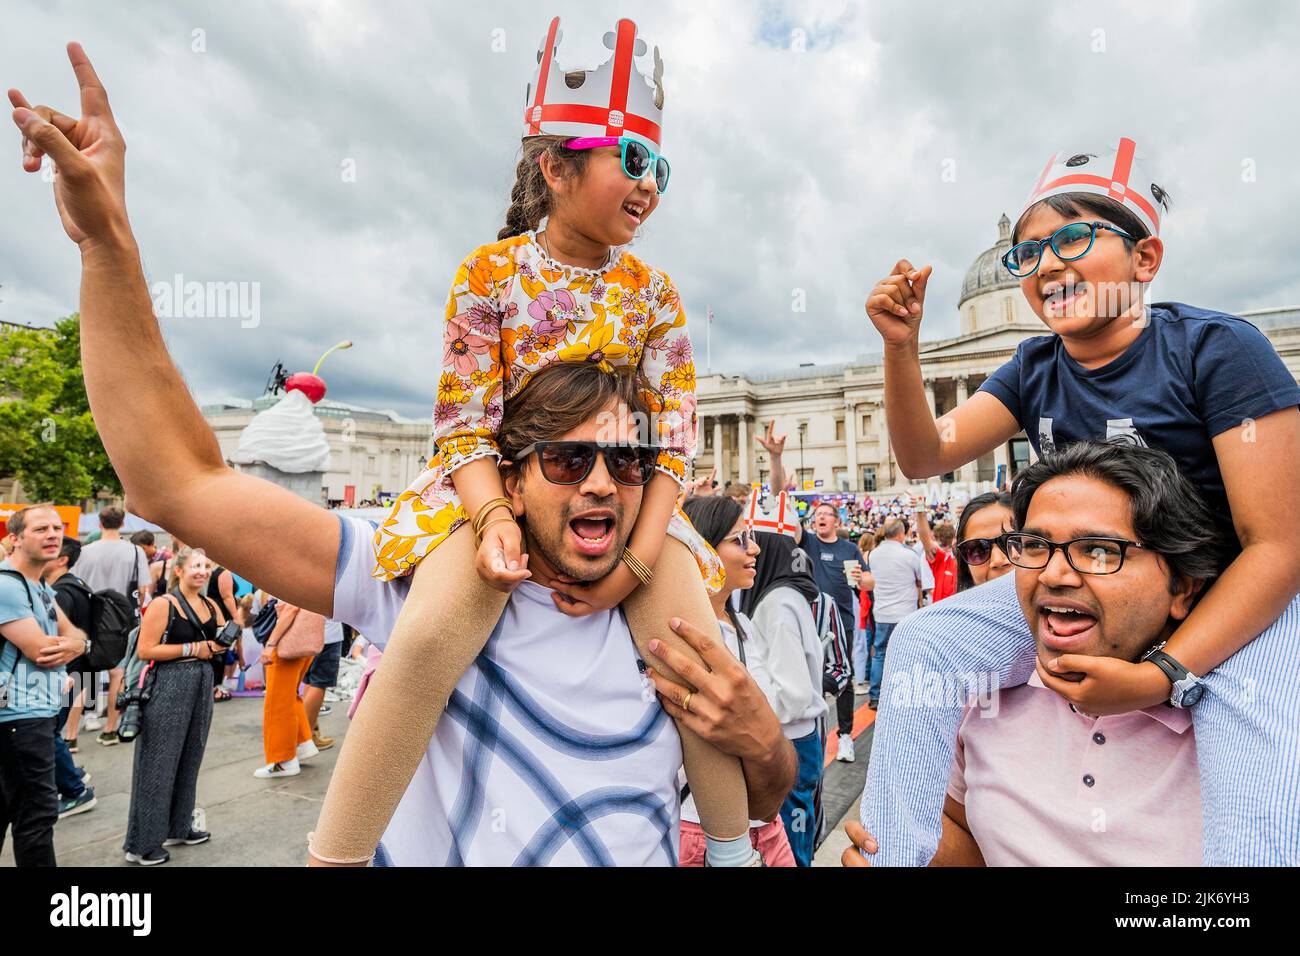 London, UK. 31st July, 2022. England fans - England v Germany UEFA Women's EURO 2022 final match fanzone in Trafalgar Square. Organised by the Mayor of London Sadiq Khan, and tournament organisers. It offered free access for up to 7,000 supporters. Credit: Guy Bell/Alamy Live News Stock Photo